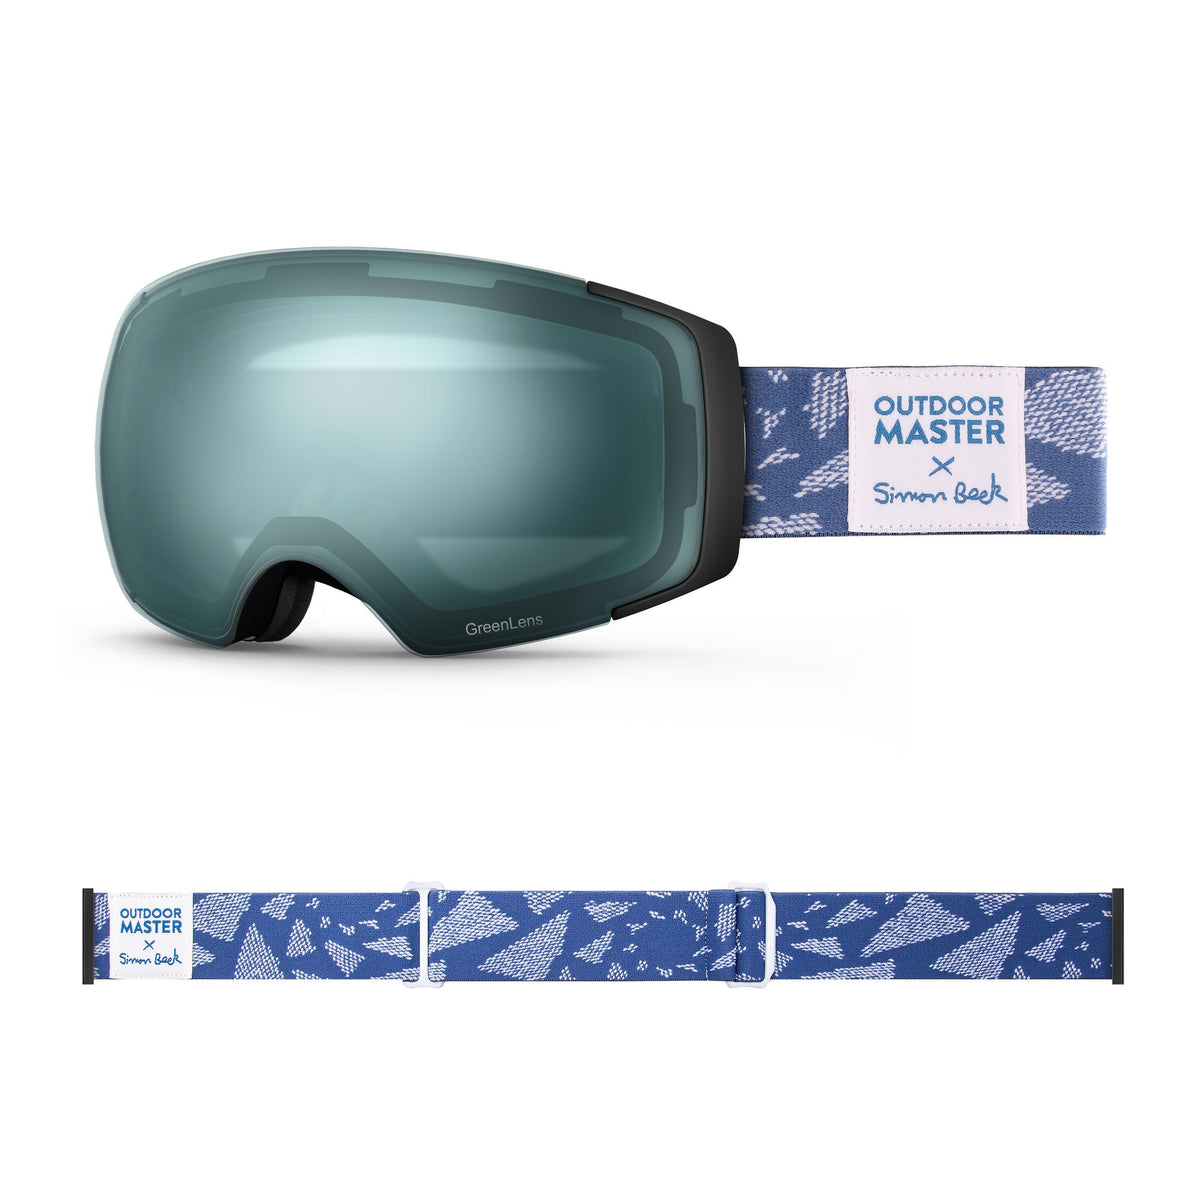 OutdoorMaster x Simon Beck Ski Goggles Pro Series - Snowshoeing Art Limited Edition OutdoorMaster GreenLens VLT 20% TAC Green Polarized Flying Triangles